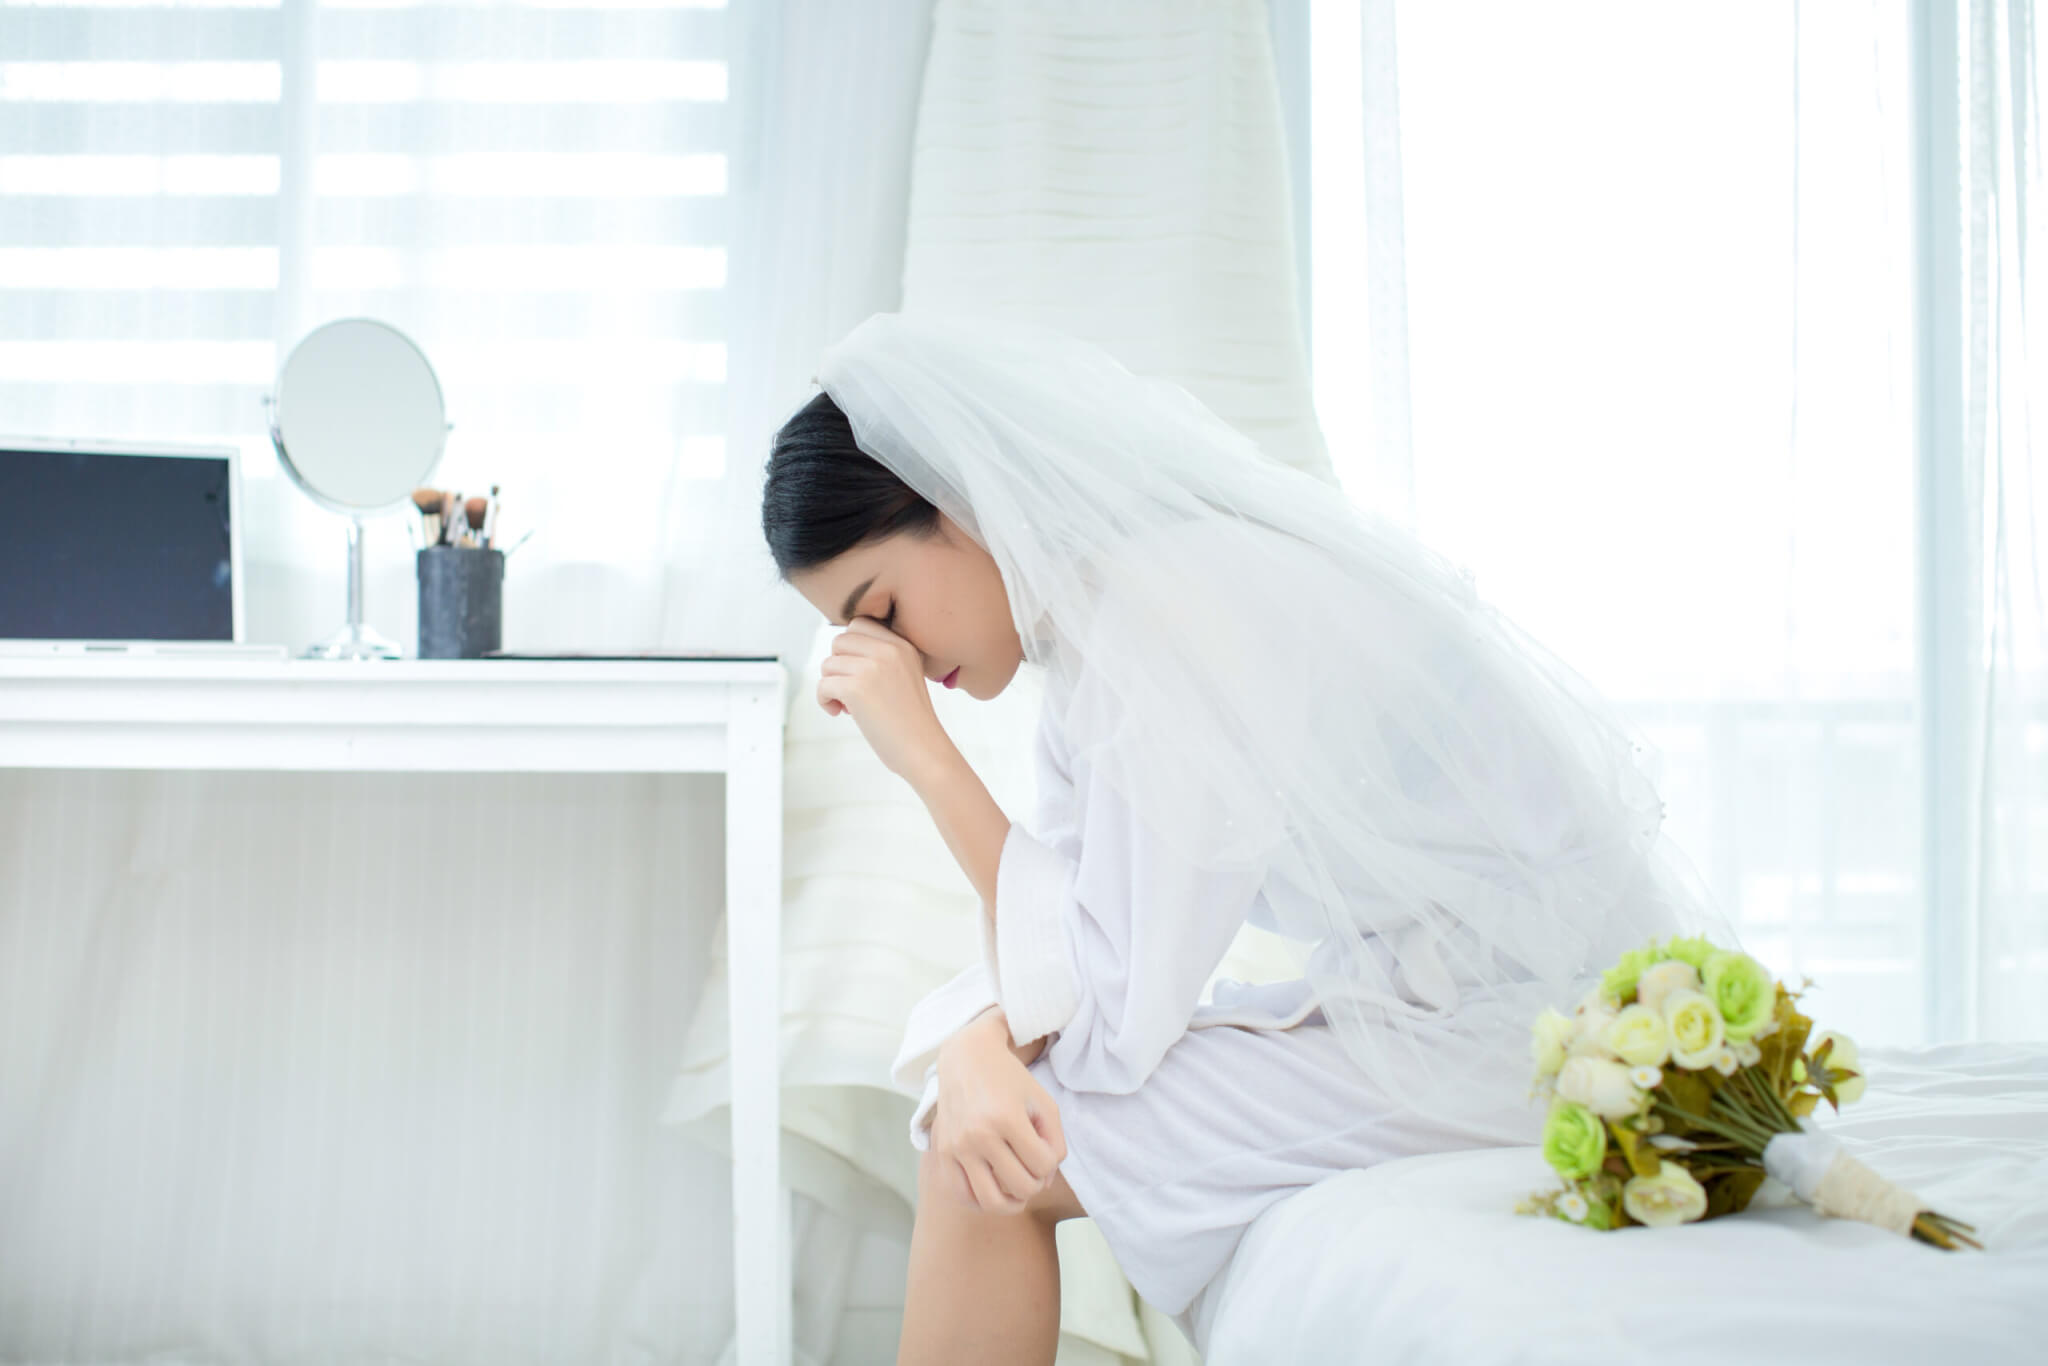 Post-Wedding Anxiety? Yes, It’s Real. Here’s How to Deal With It.